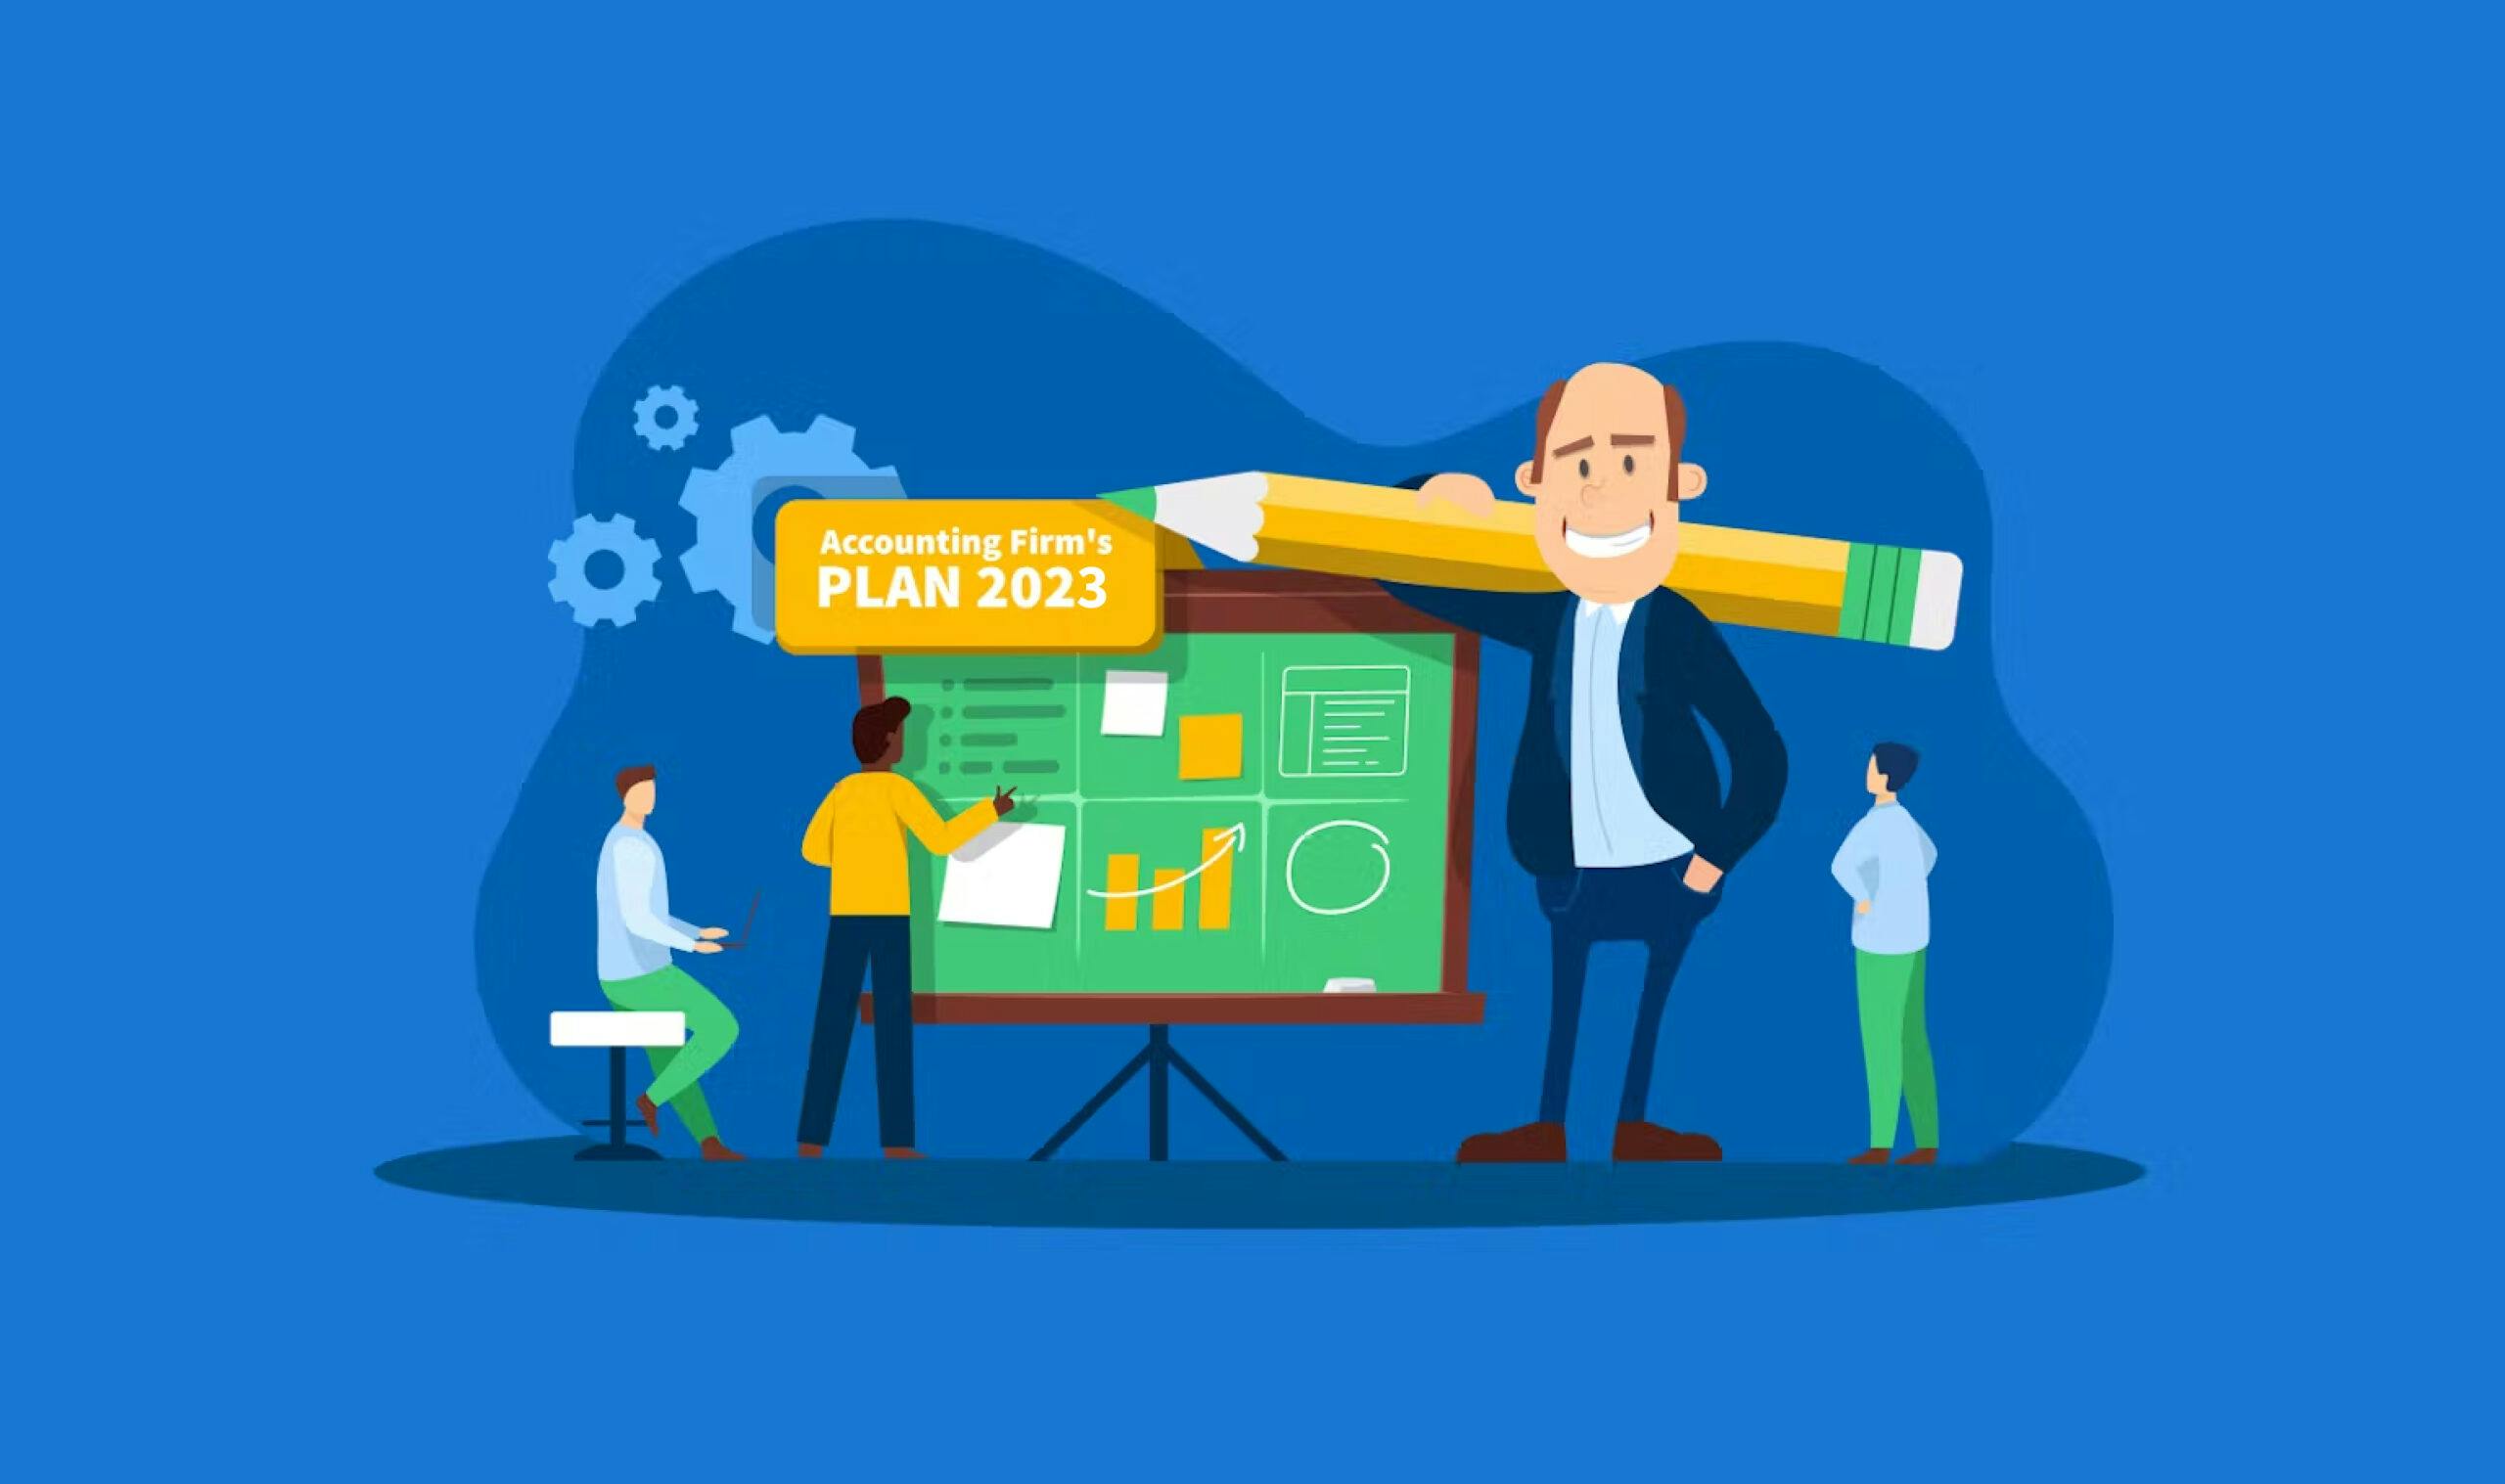 Developing Your Accounting Firm's Plan for 2023